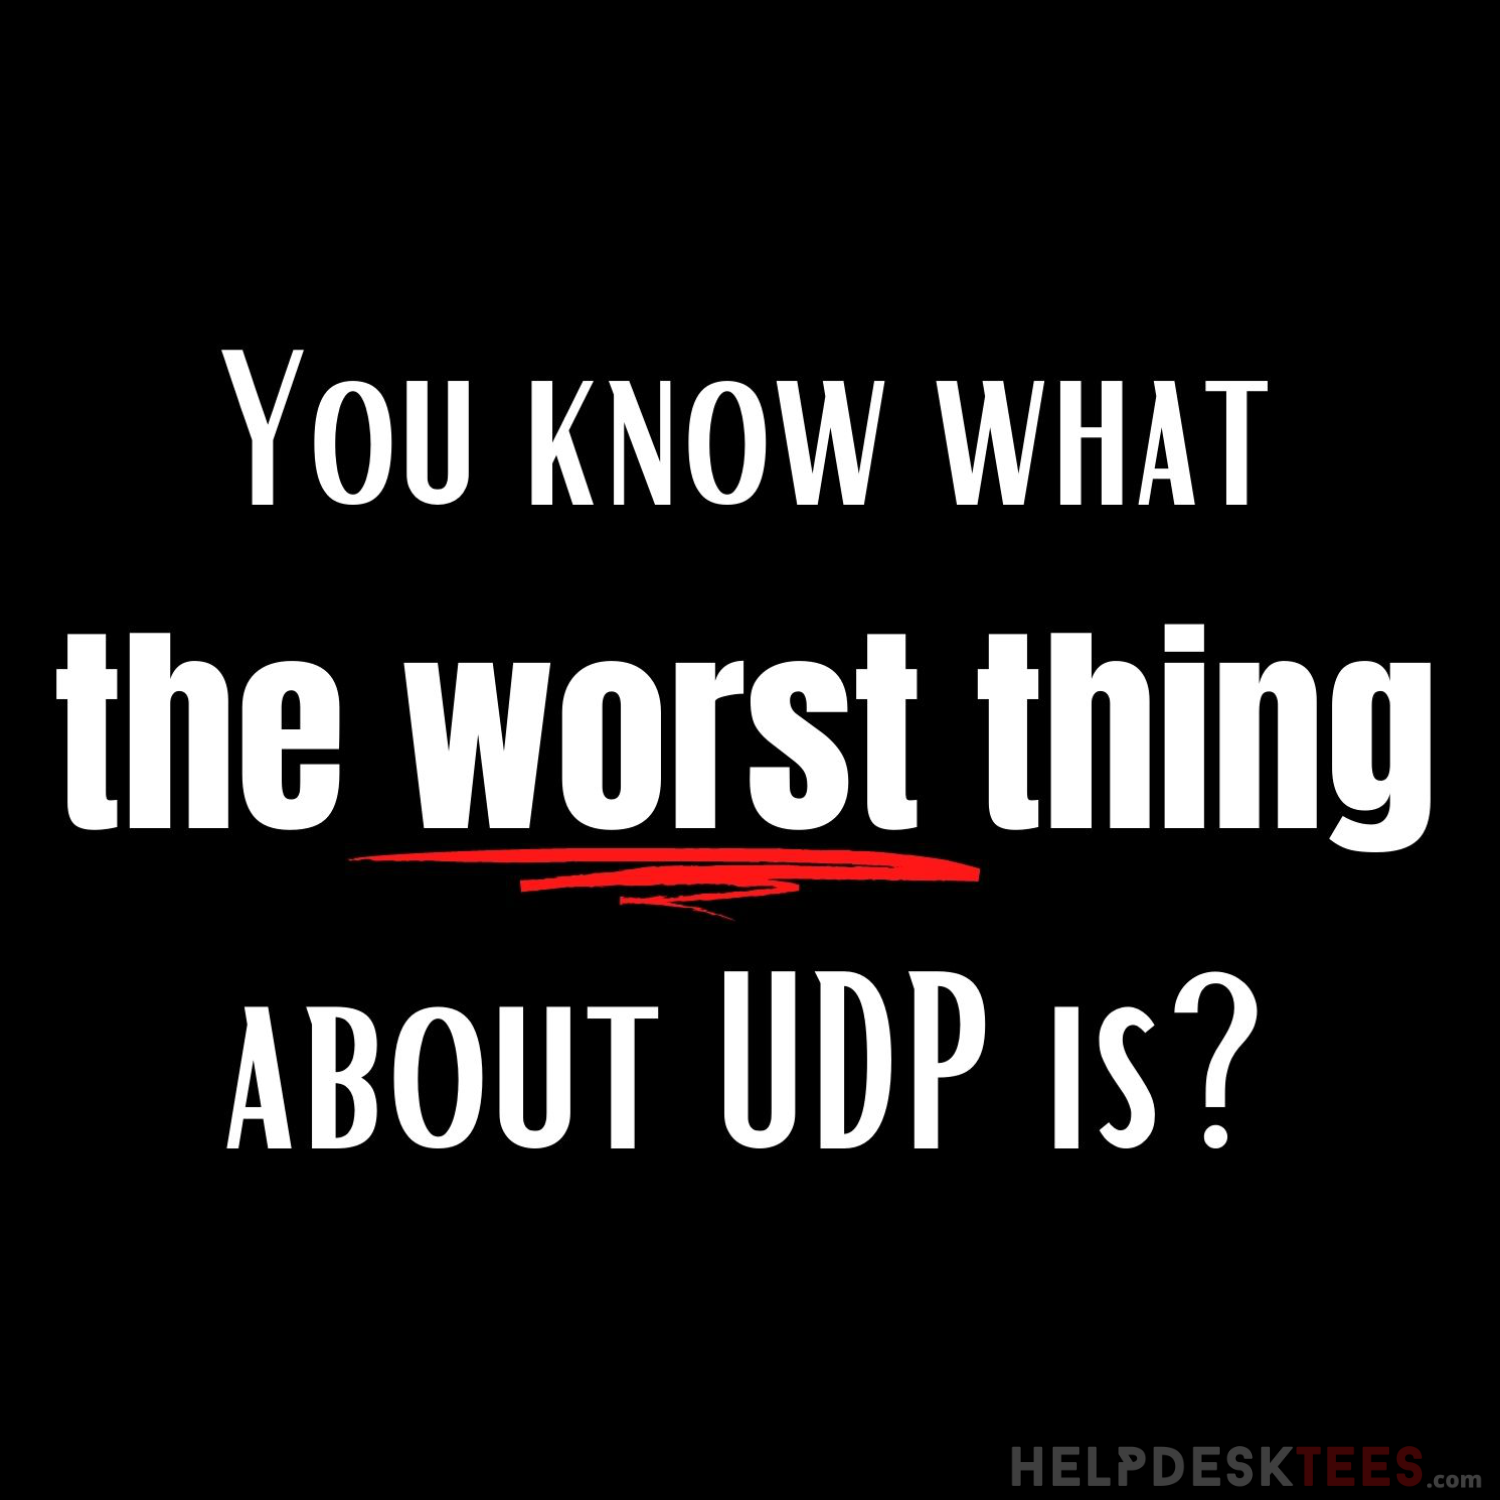 What is the worst thing about UDP?